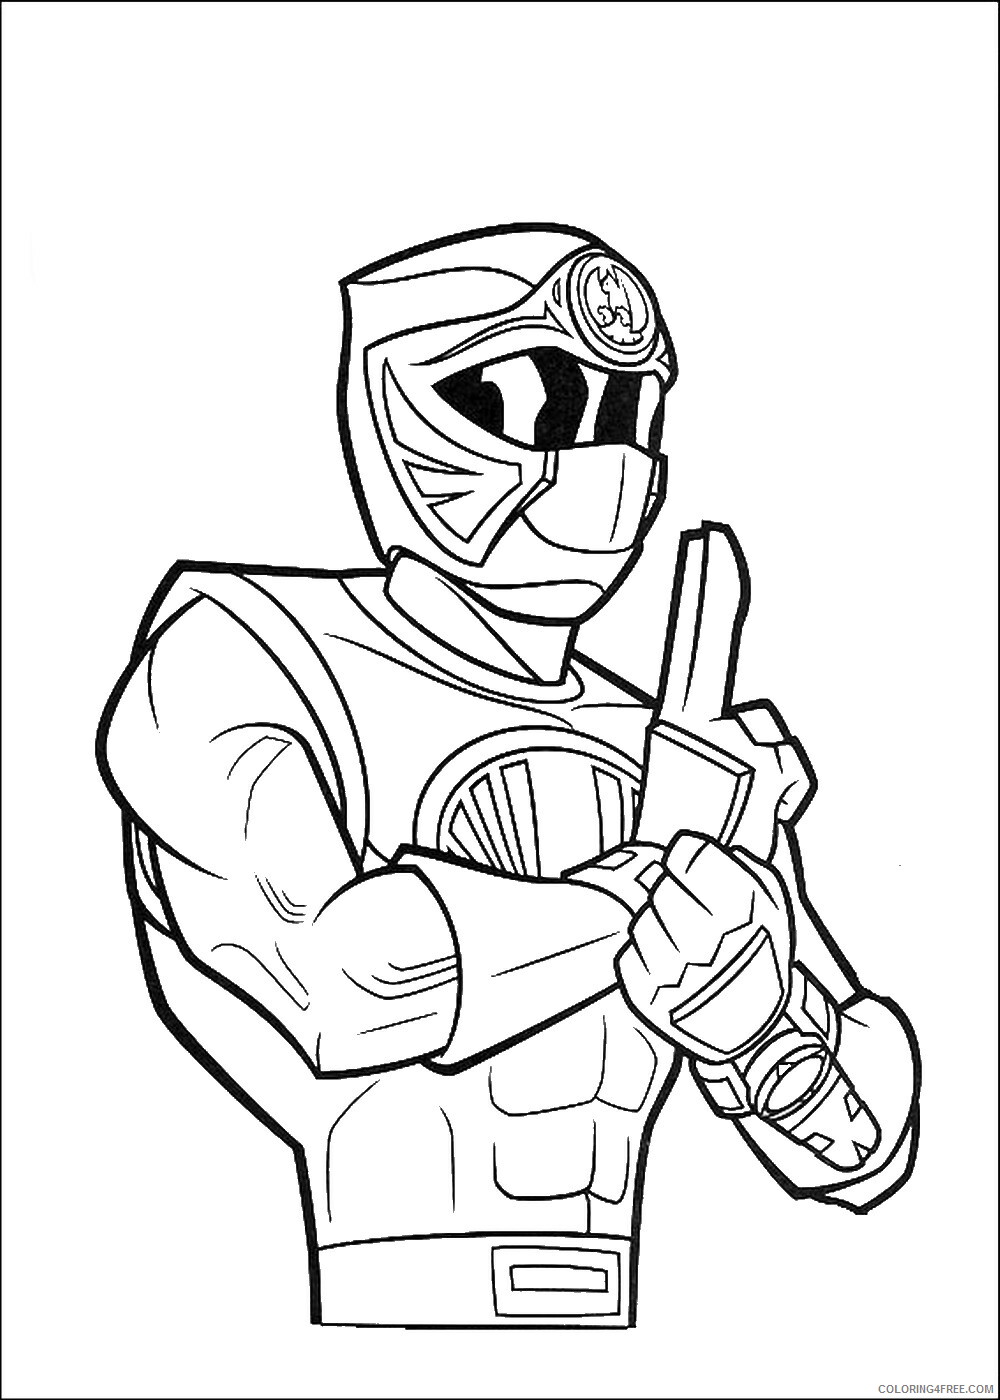 Power Rangers Coloring Pages TV Film power_ranger_82 Printable 2020 06694 Coloring4free